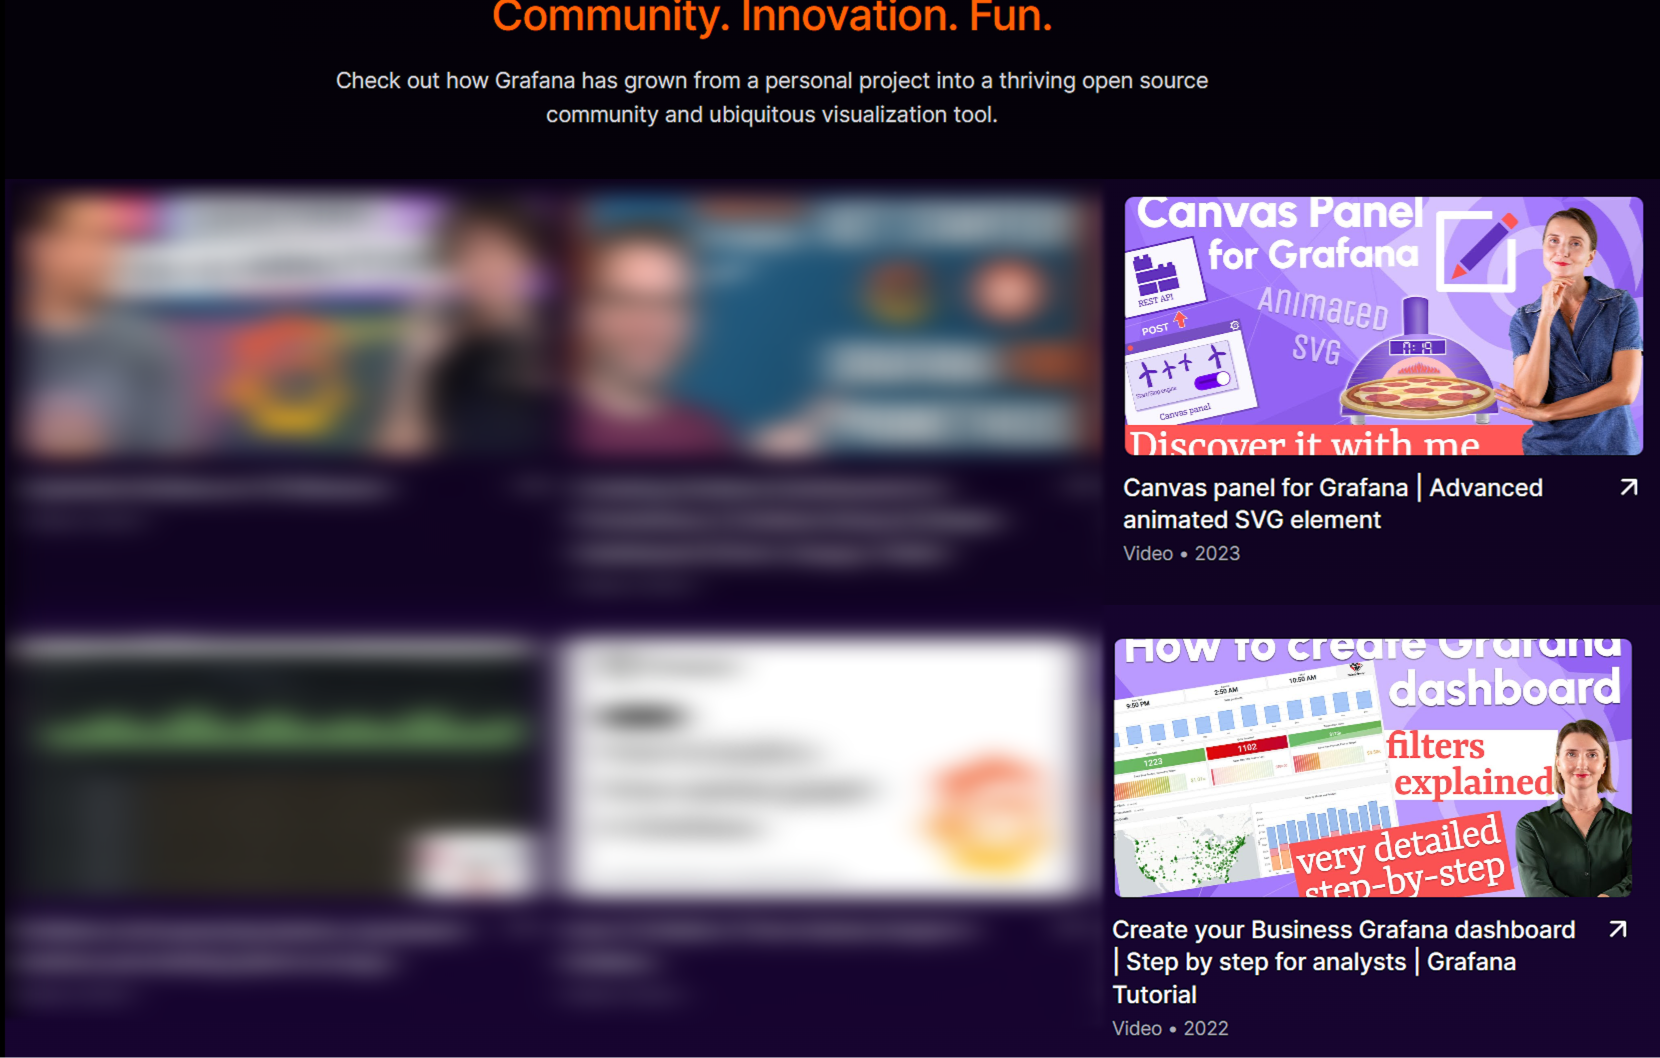 Grafana added our videos on the Community, Innovation, Fun page.